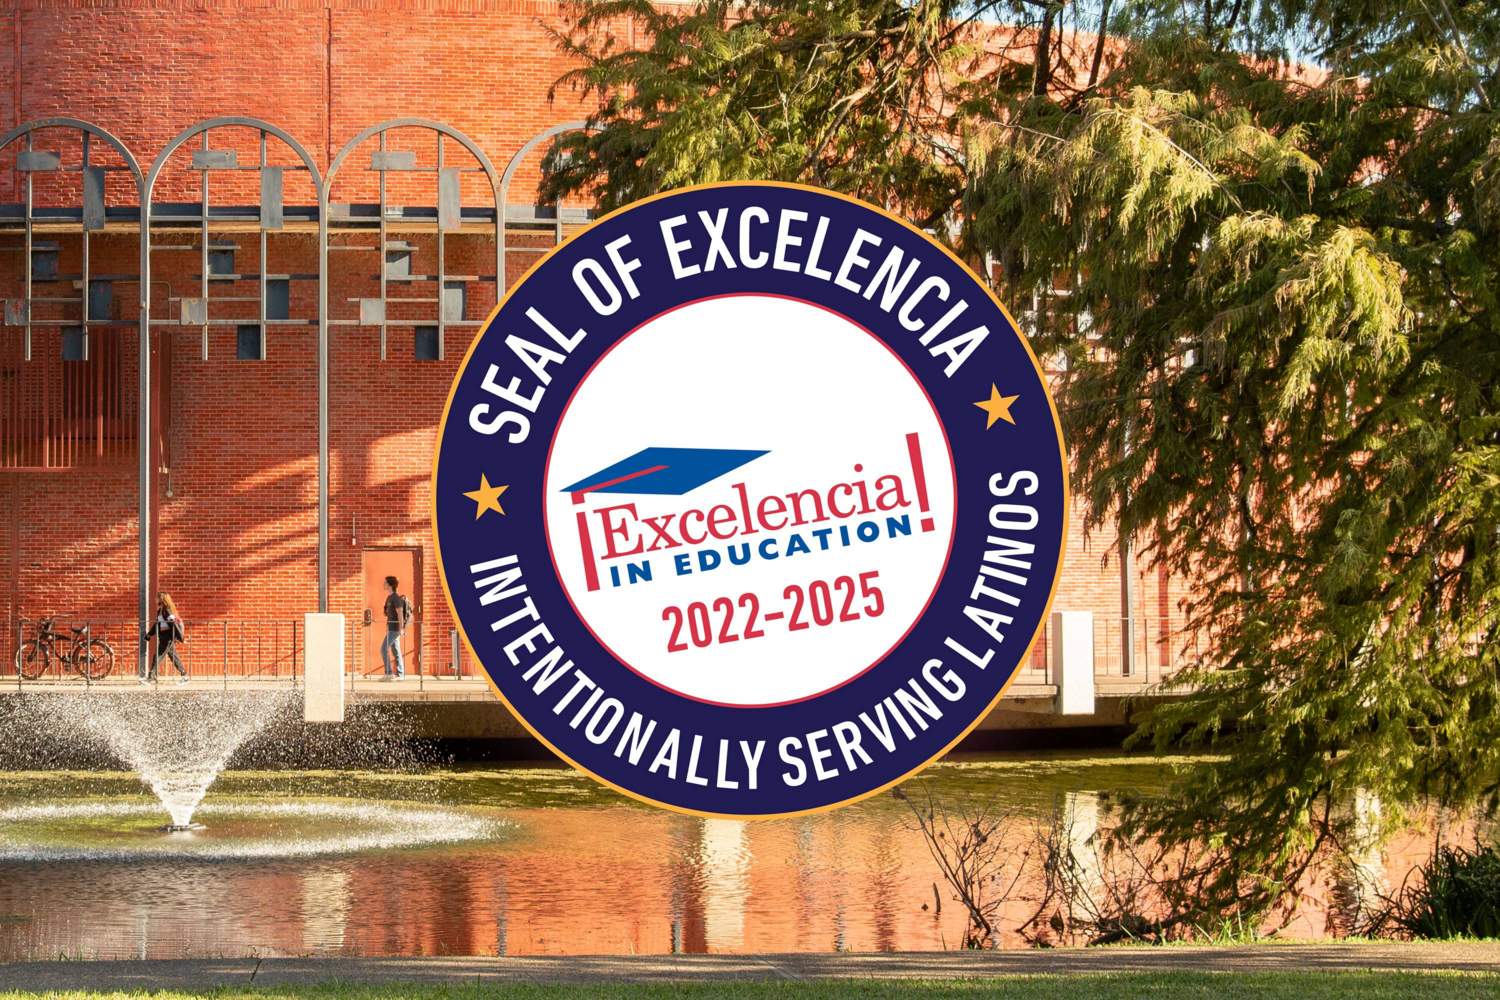 Seal of Excelencia, Intentionally serving Latinos; Excelencia in Education 2022-25